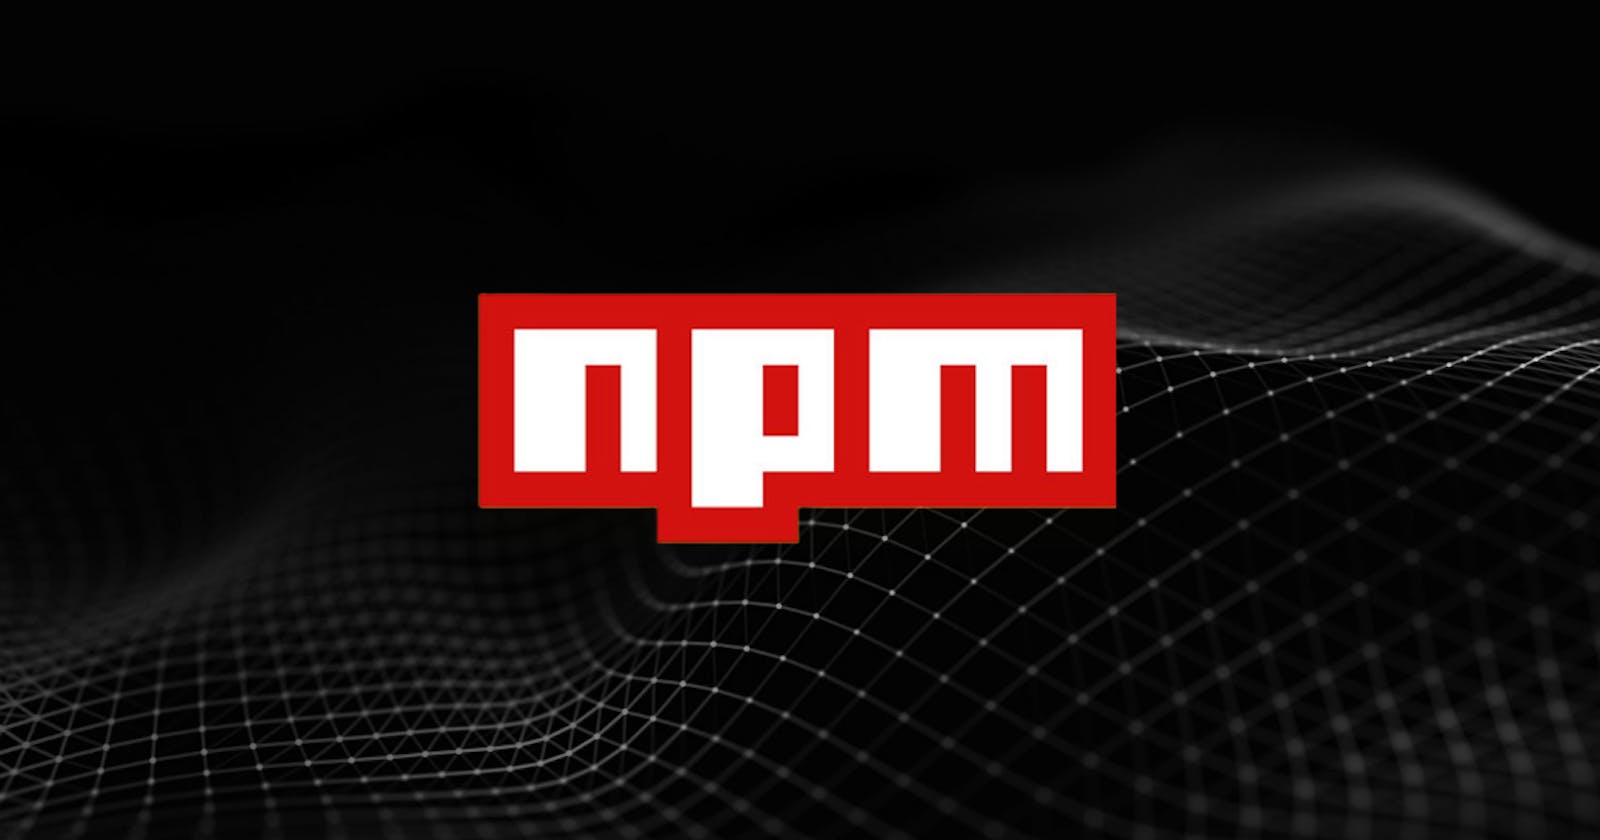 Protecting Your Software Supply Chain: Popular NPM Package Vulnerable to Account Takeover Attack